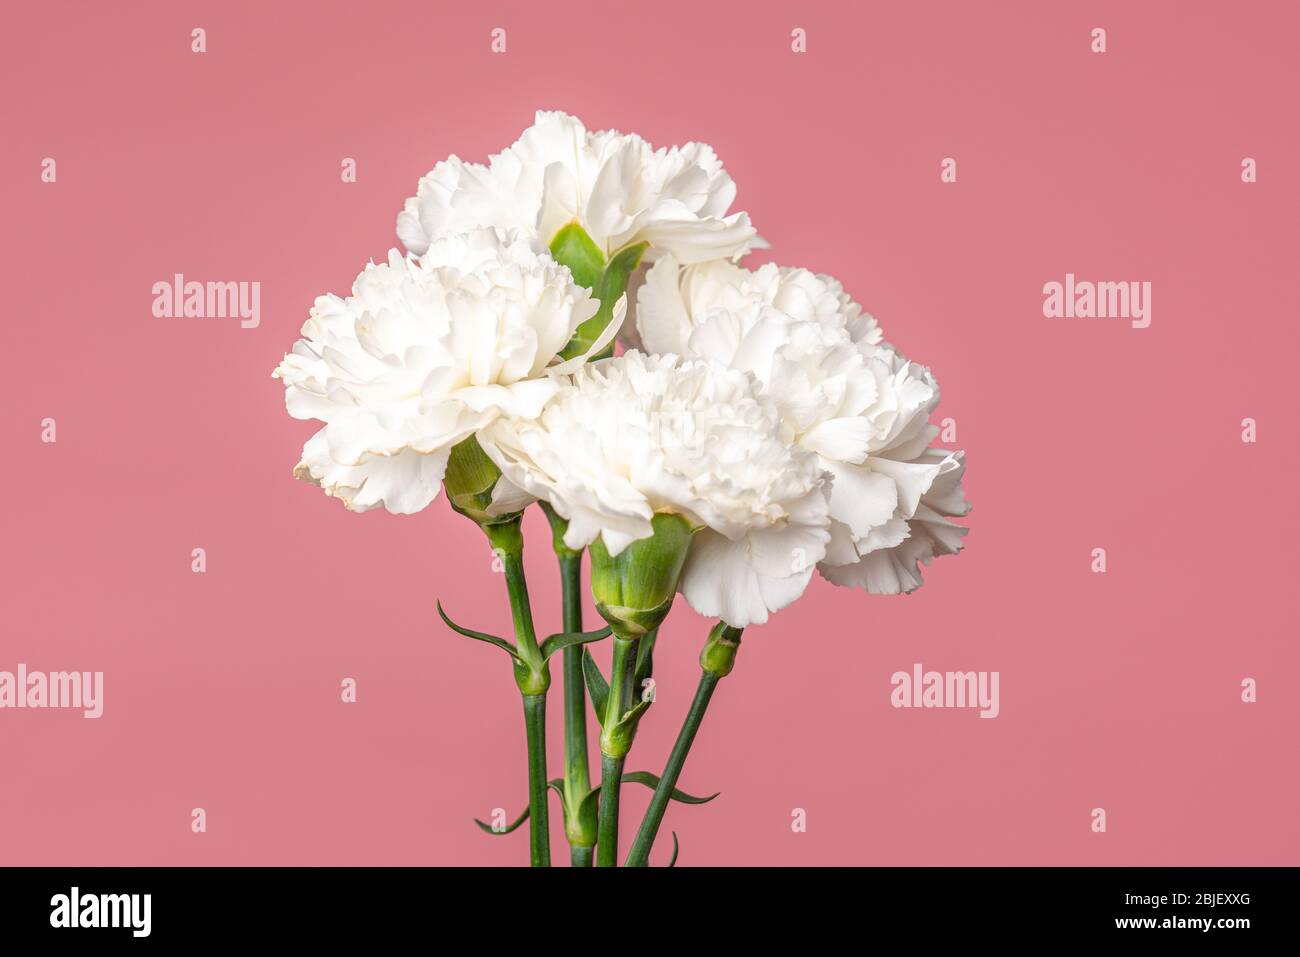 Detail of the Carnation flowers Dianthus caryophyllus also known as Clove Pink. Isolated on pure pink Stock Photo